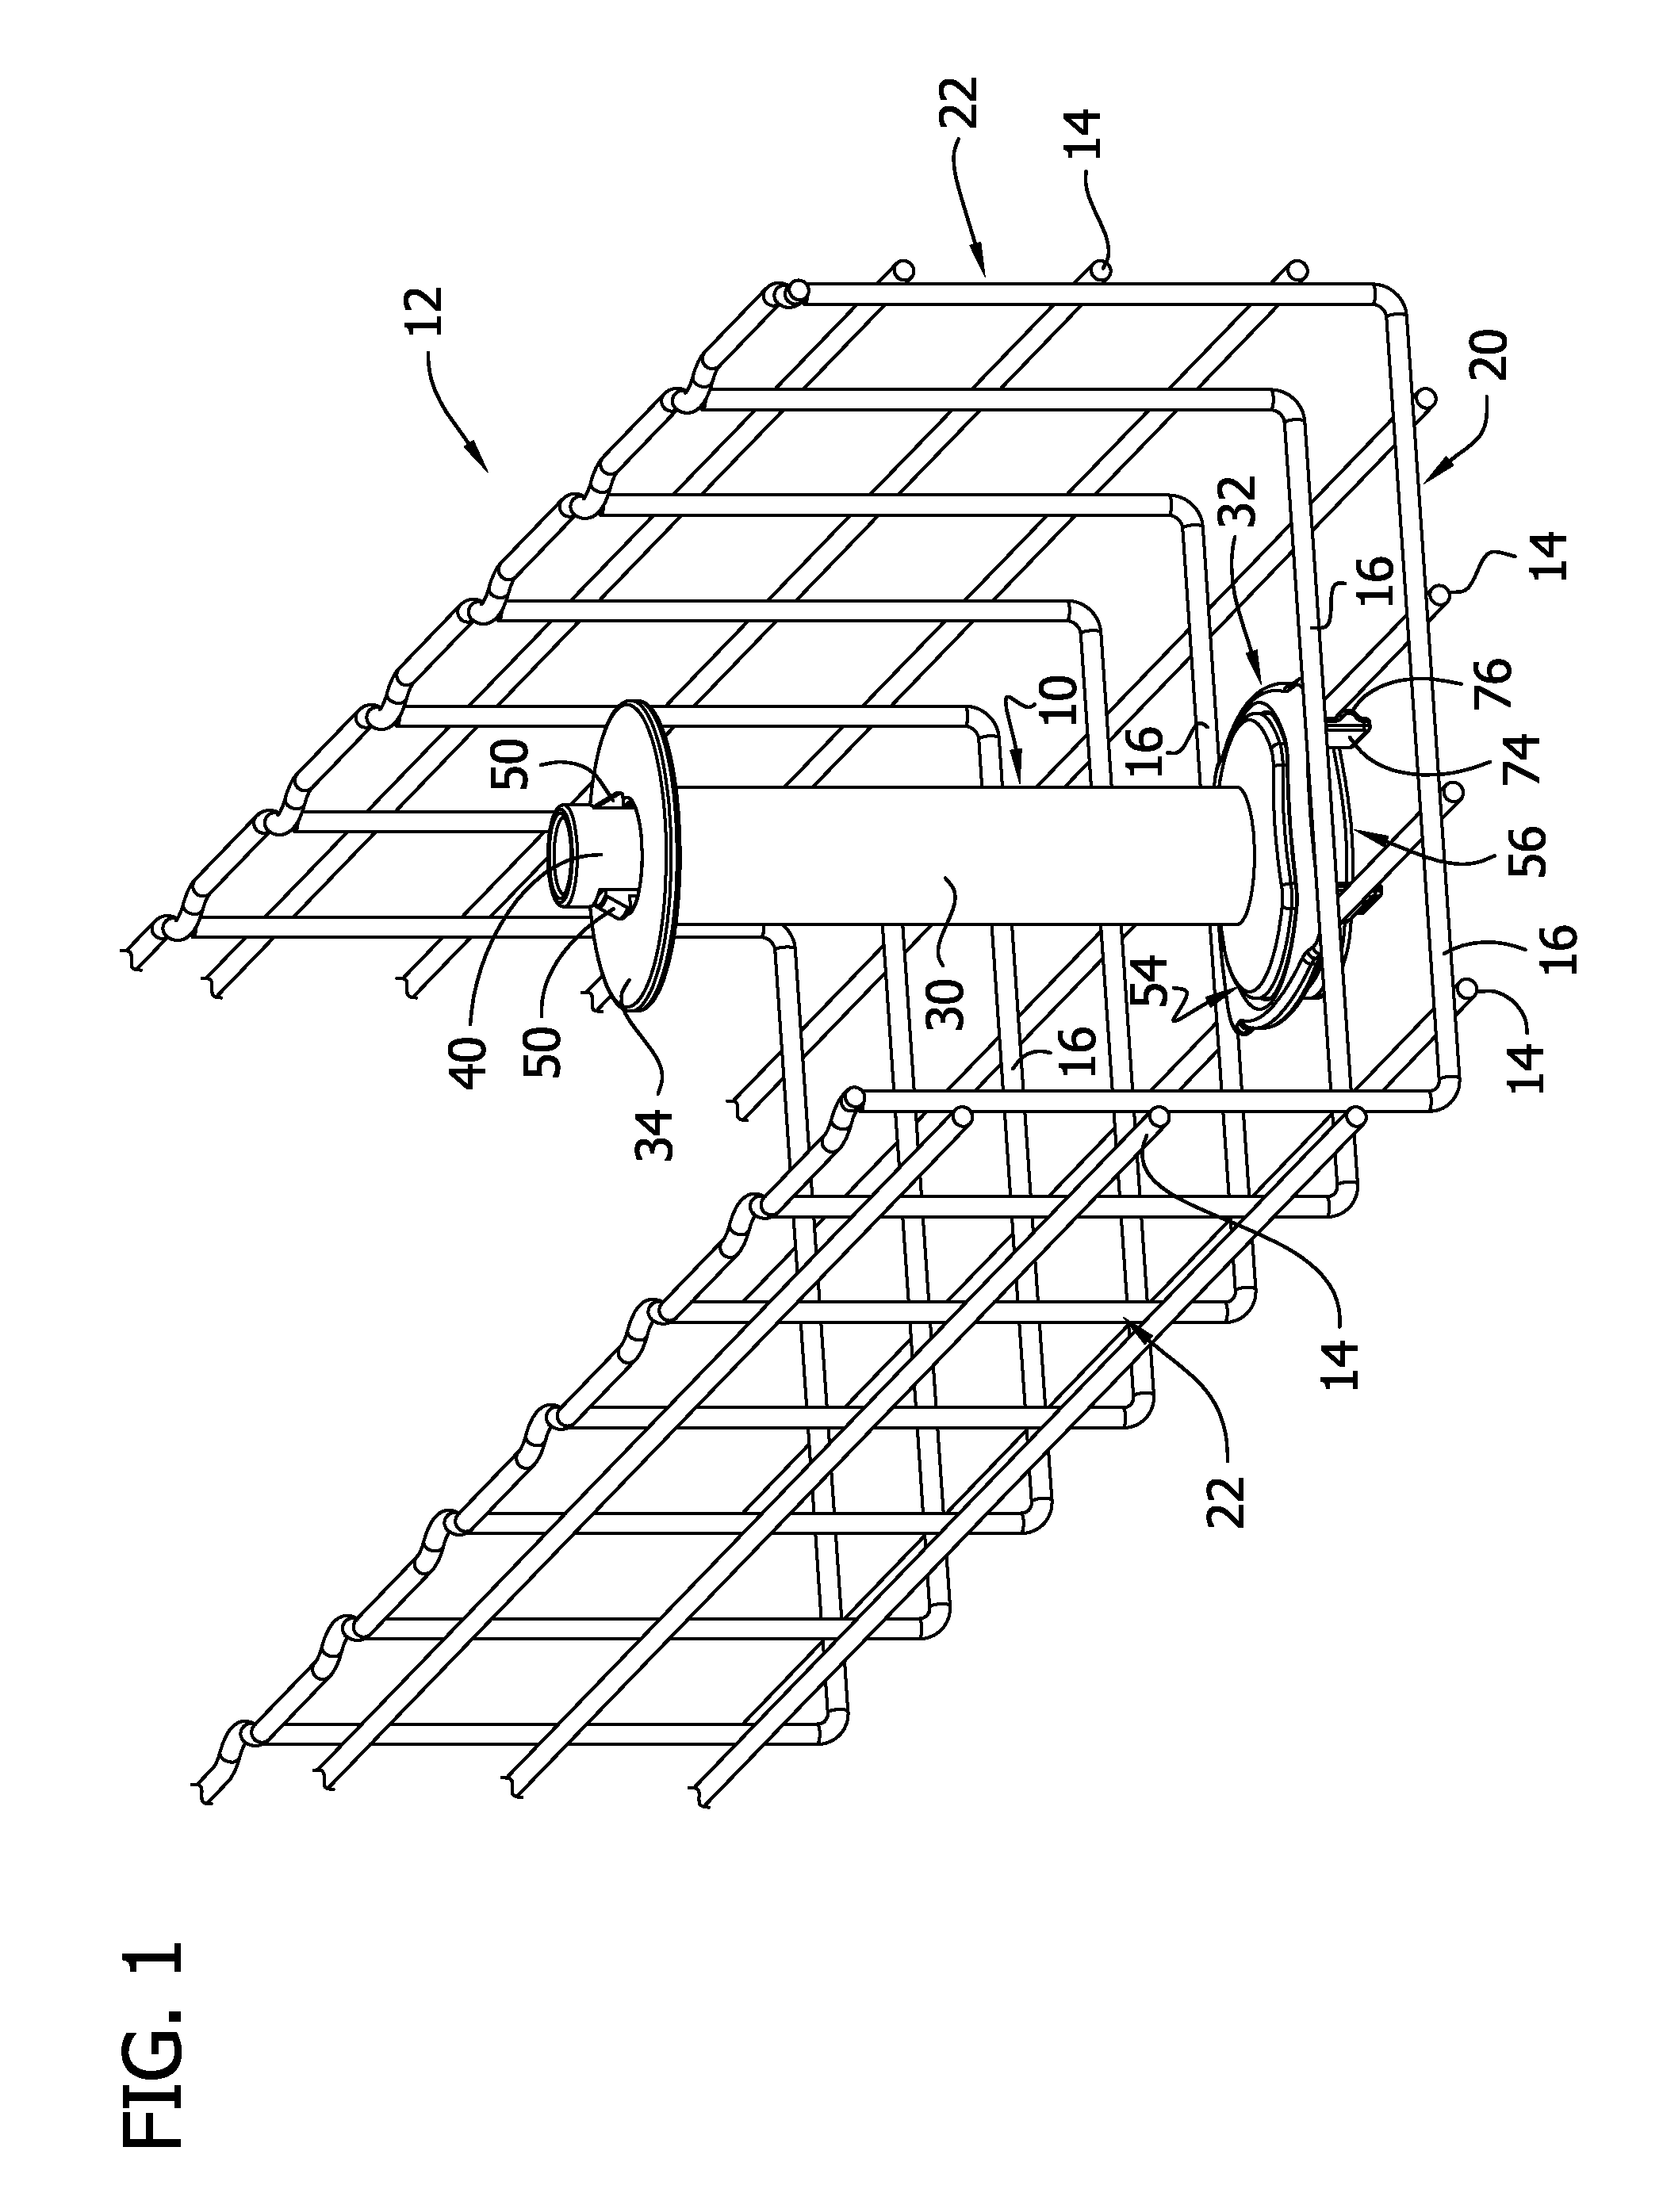 Cable guide for wire basket cable tray